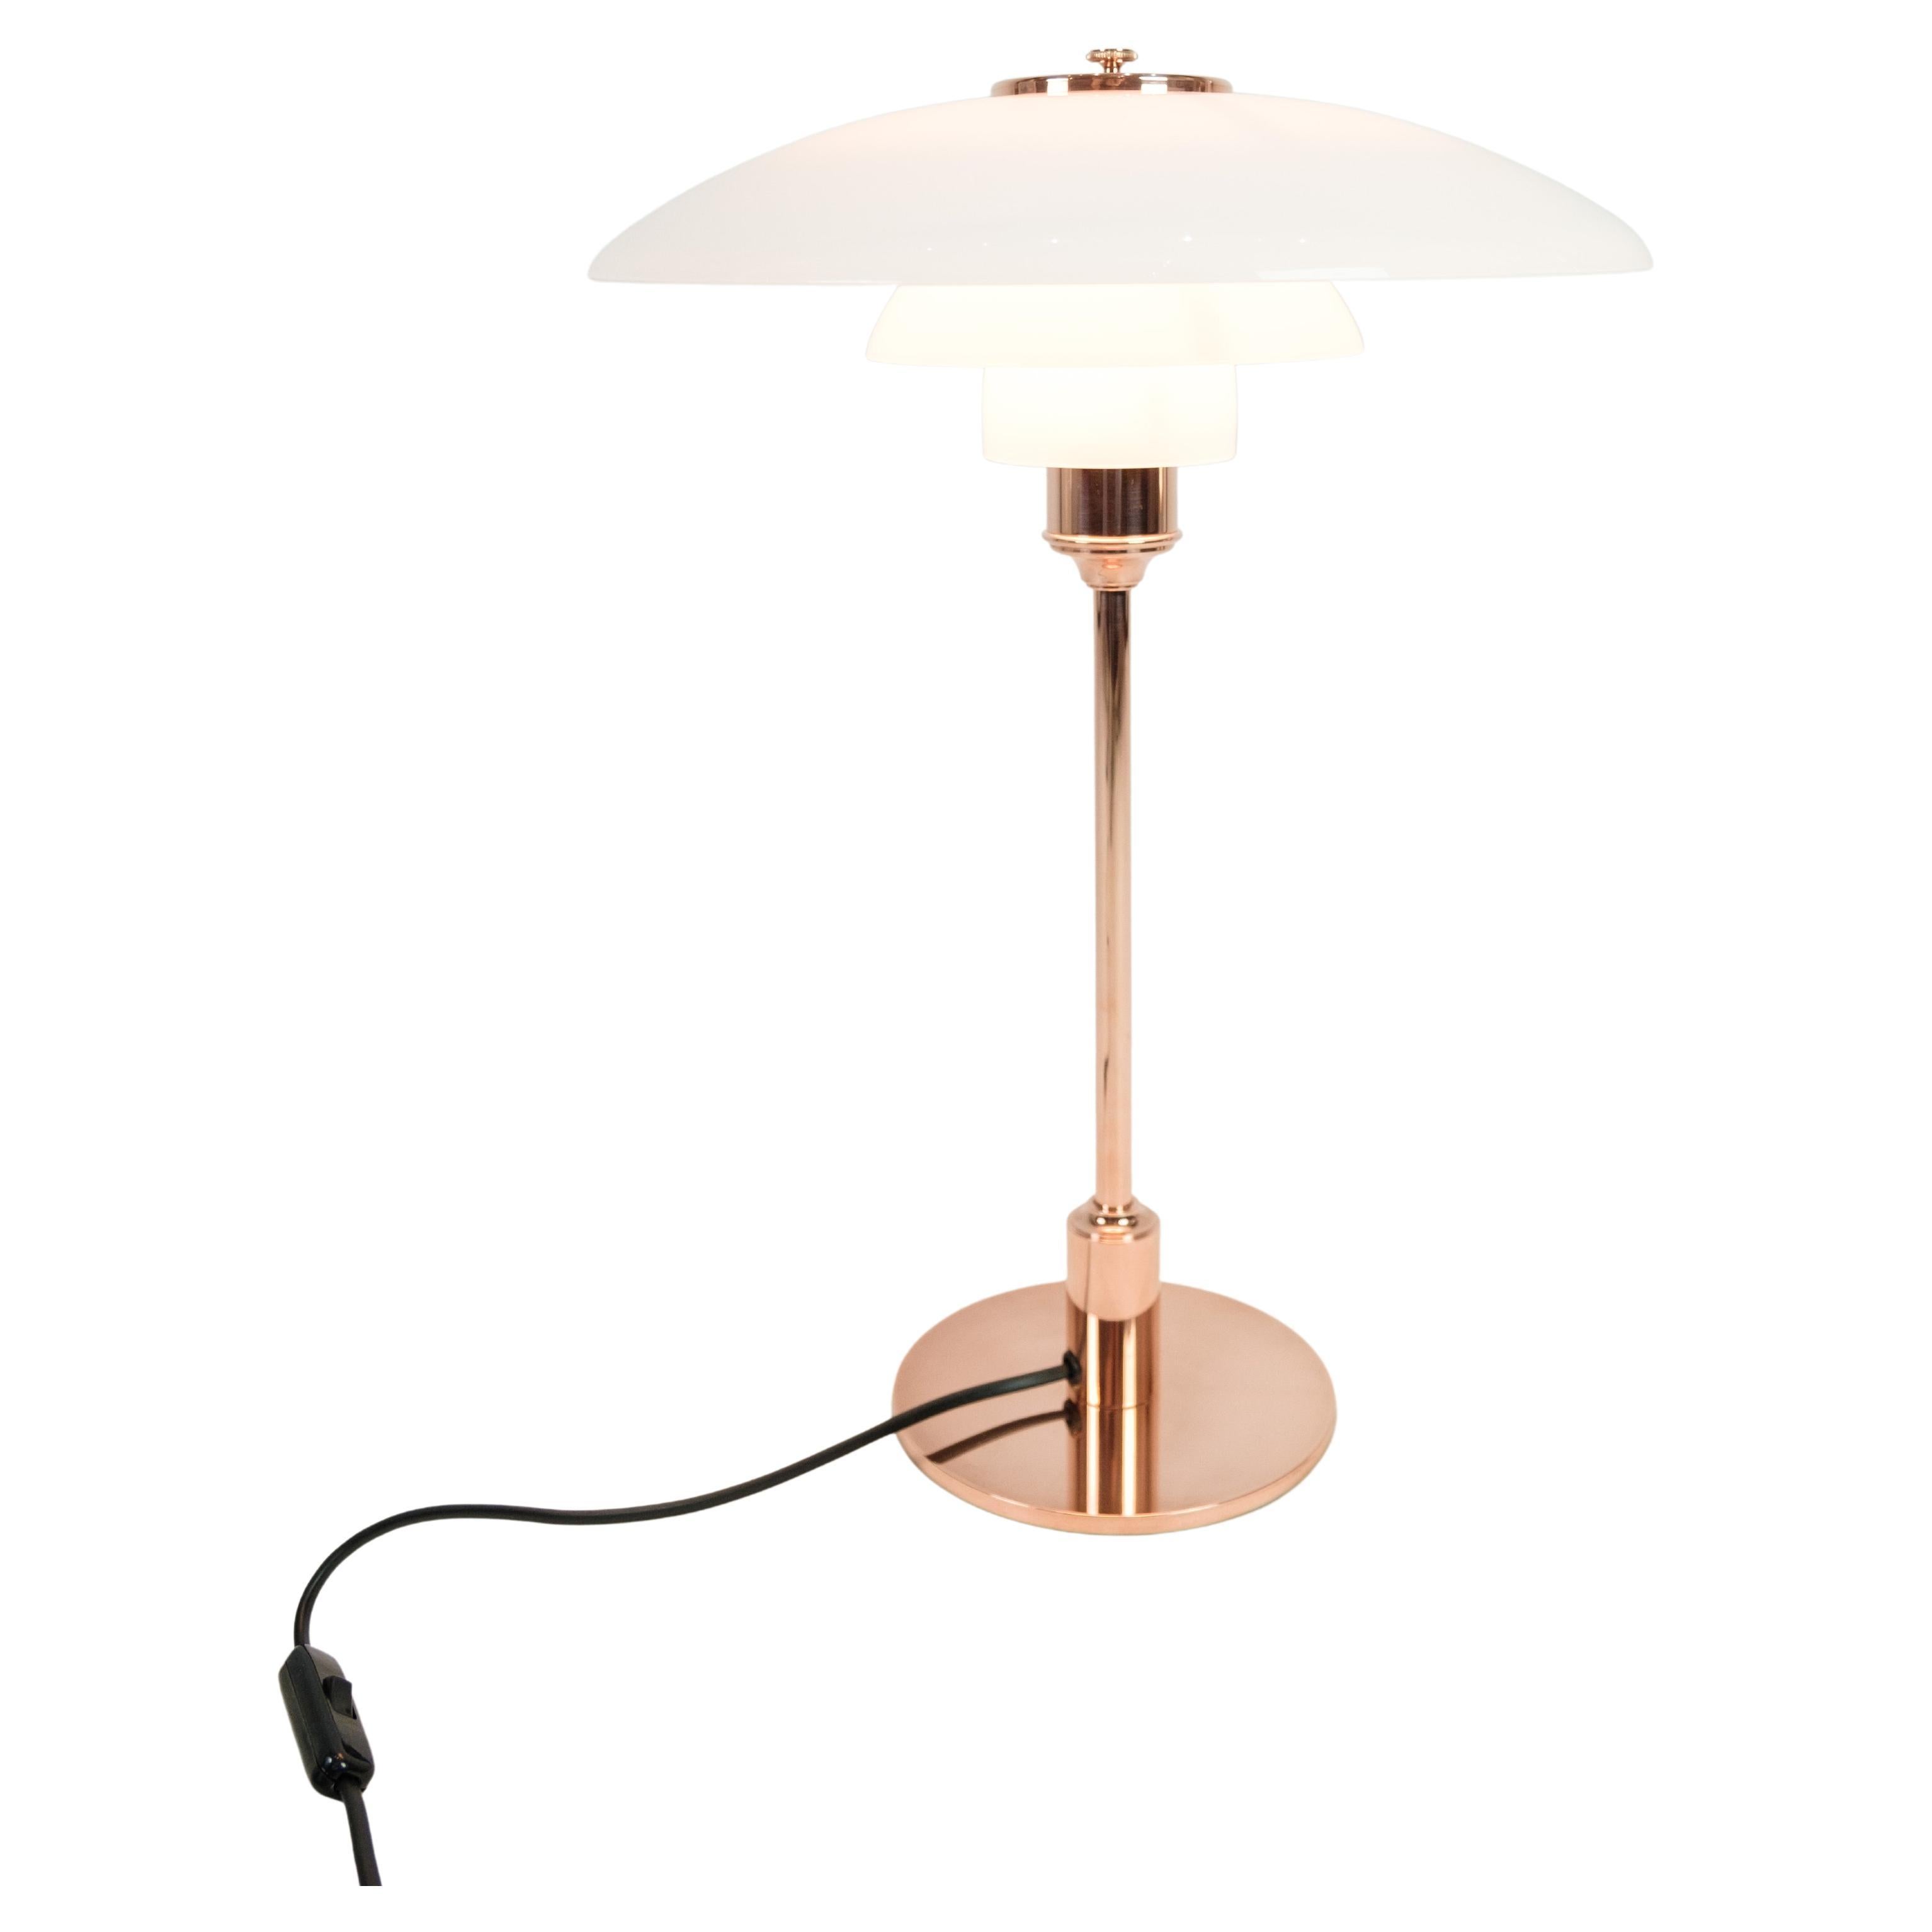 PH Table Lamp Model Ph3½-2½ Limited Edition By Poul Henningsen From 1927